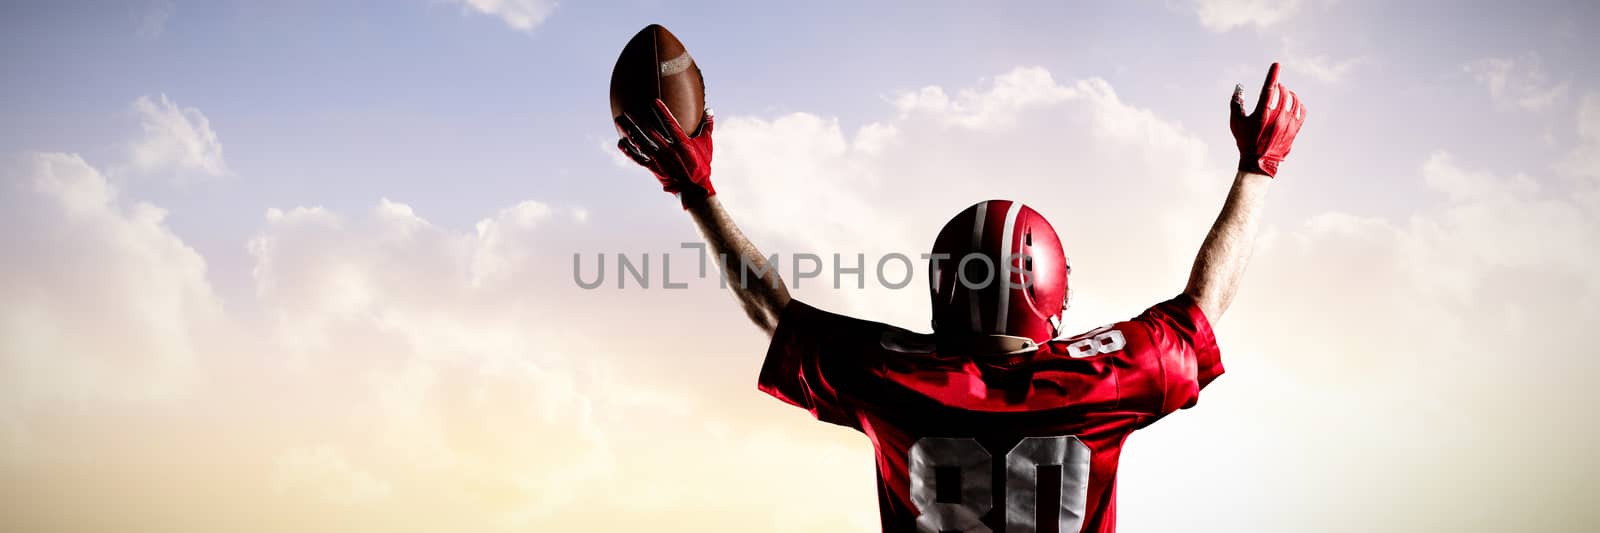 American football player in helmet holding rugby ball against sunset with clouds